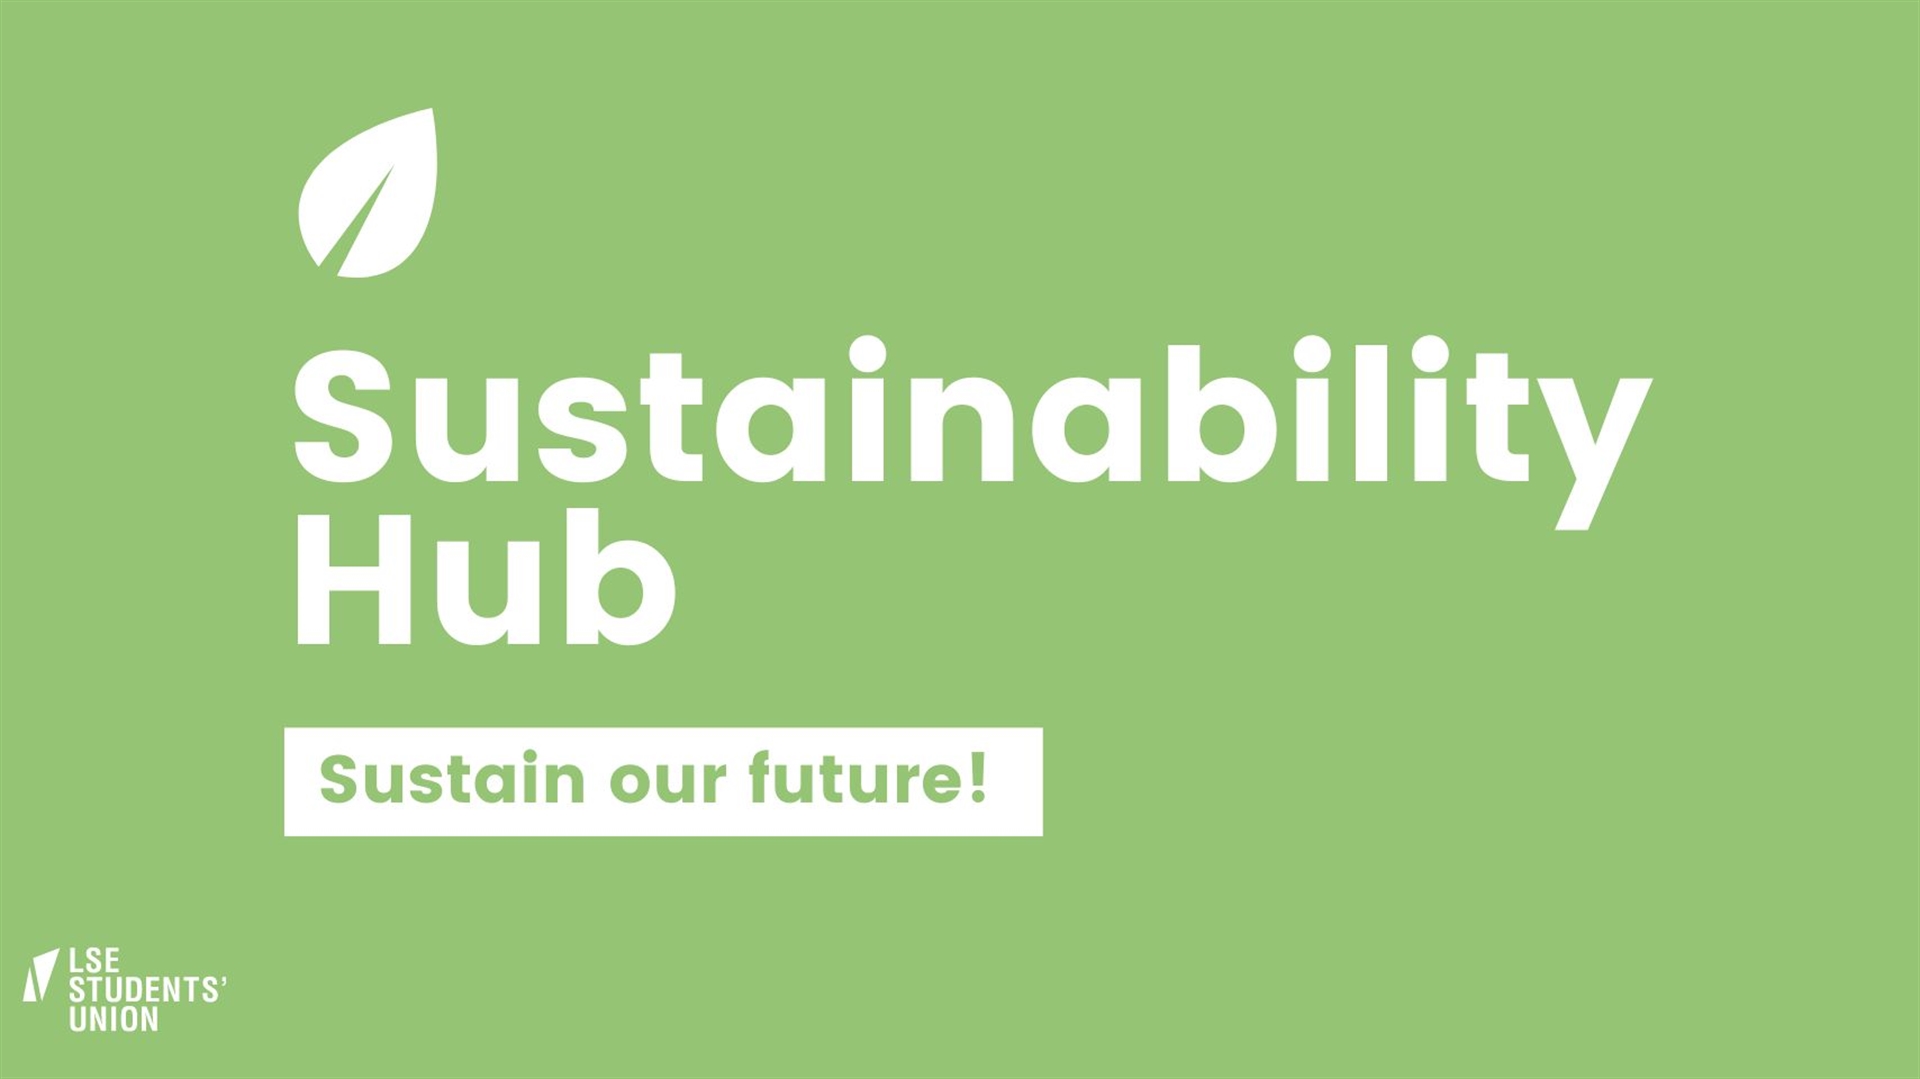 Find out more about how to get involved with sustainability initiatives, what we are doing to be a truly sustainable organisation and find resources to help you live more sustainably